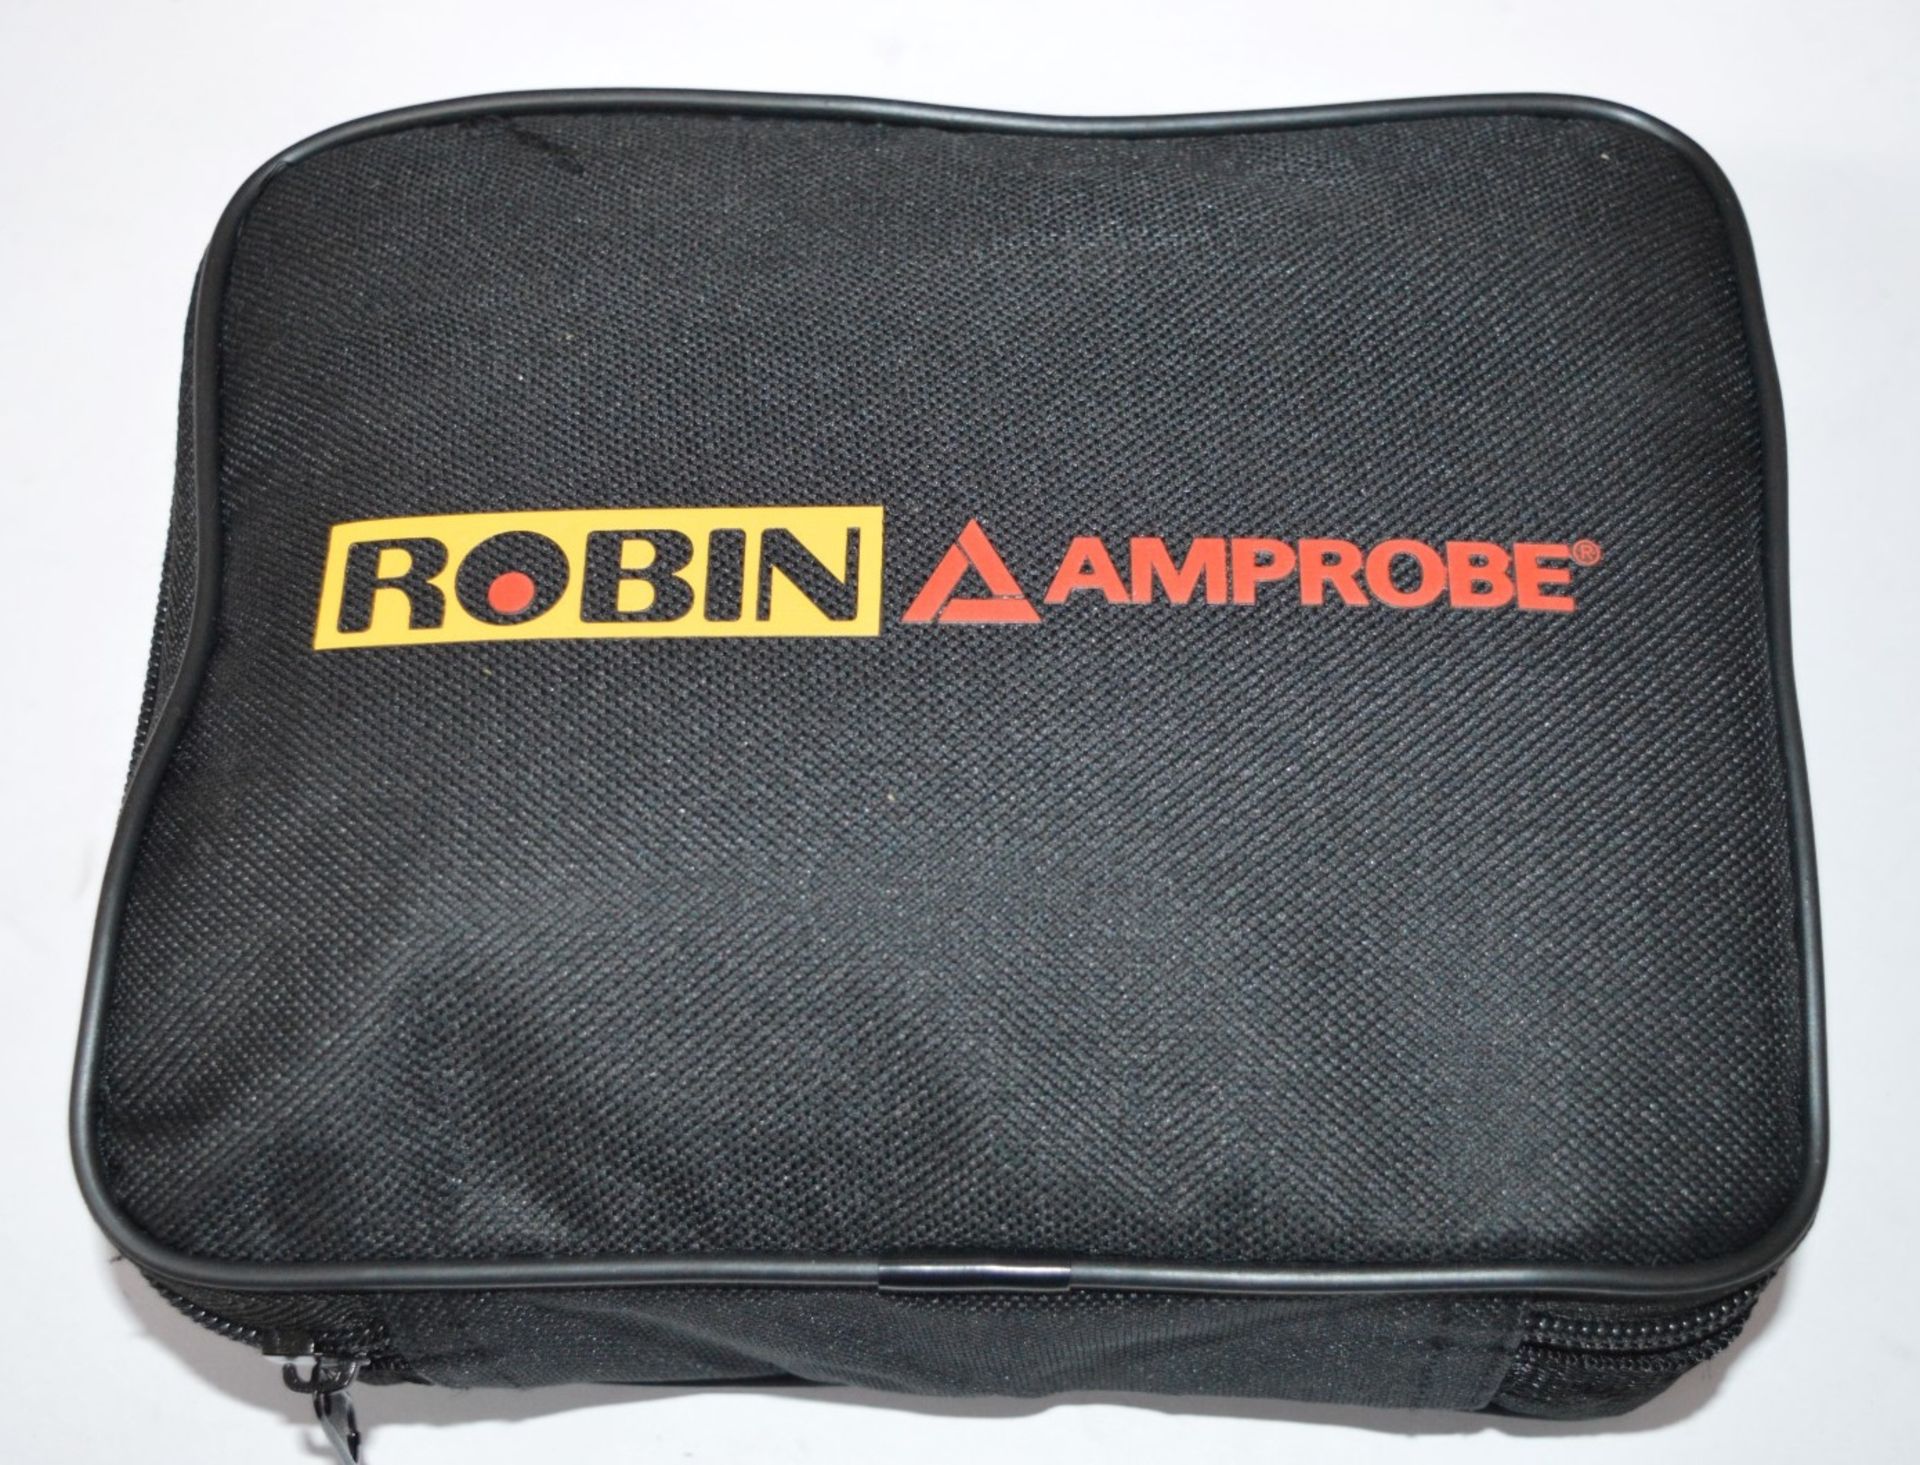 1 x Robin Amprobe Digital RCD Tester Wth Fast Trip - Model KMP7020 - Boxed With All Accessories - - Image 2 of 12